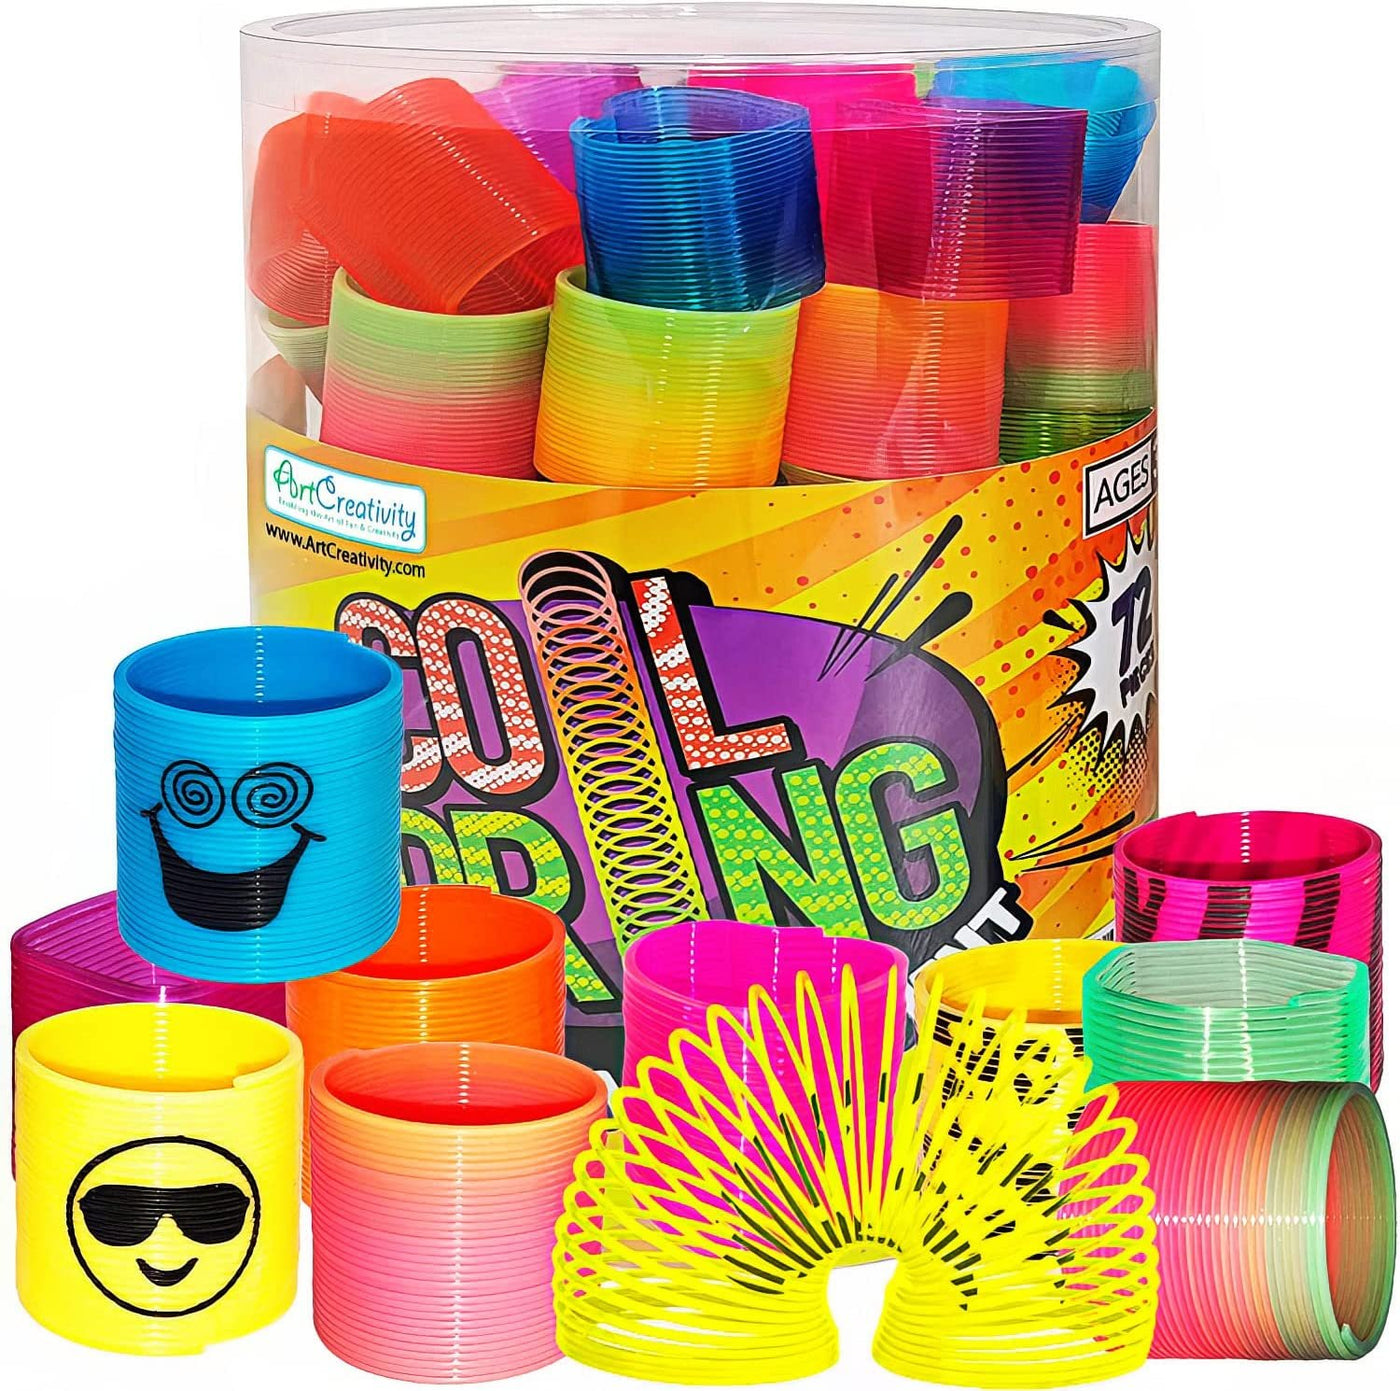 ArtCreativity Spring Toy Assortment, Pack of 72 Mini Plastic Coil Springs Party Favors for Kids, Multicolor with Different Shapes, Goody Bag Filler, Party Prizes and Stocking Stuffers for Kids